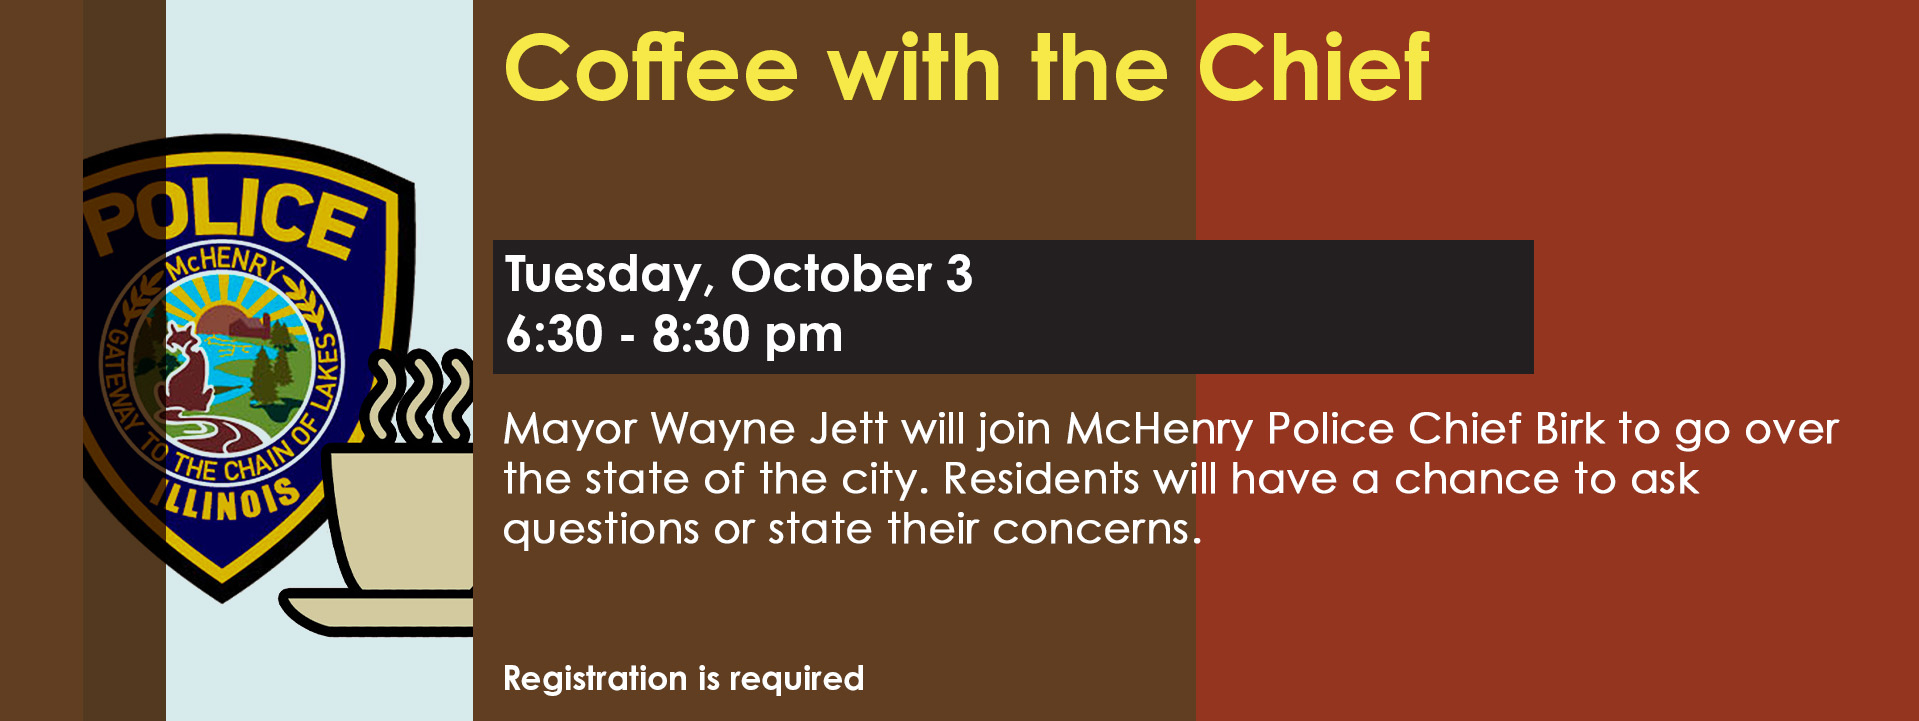 Coffee with the chief Oct 3